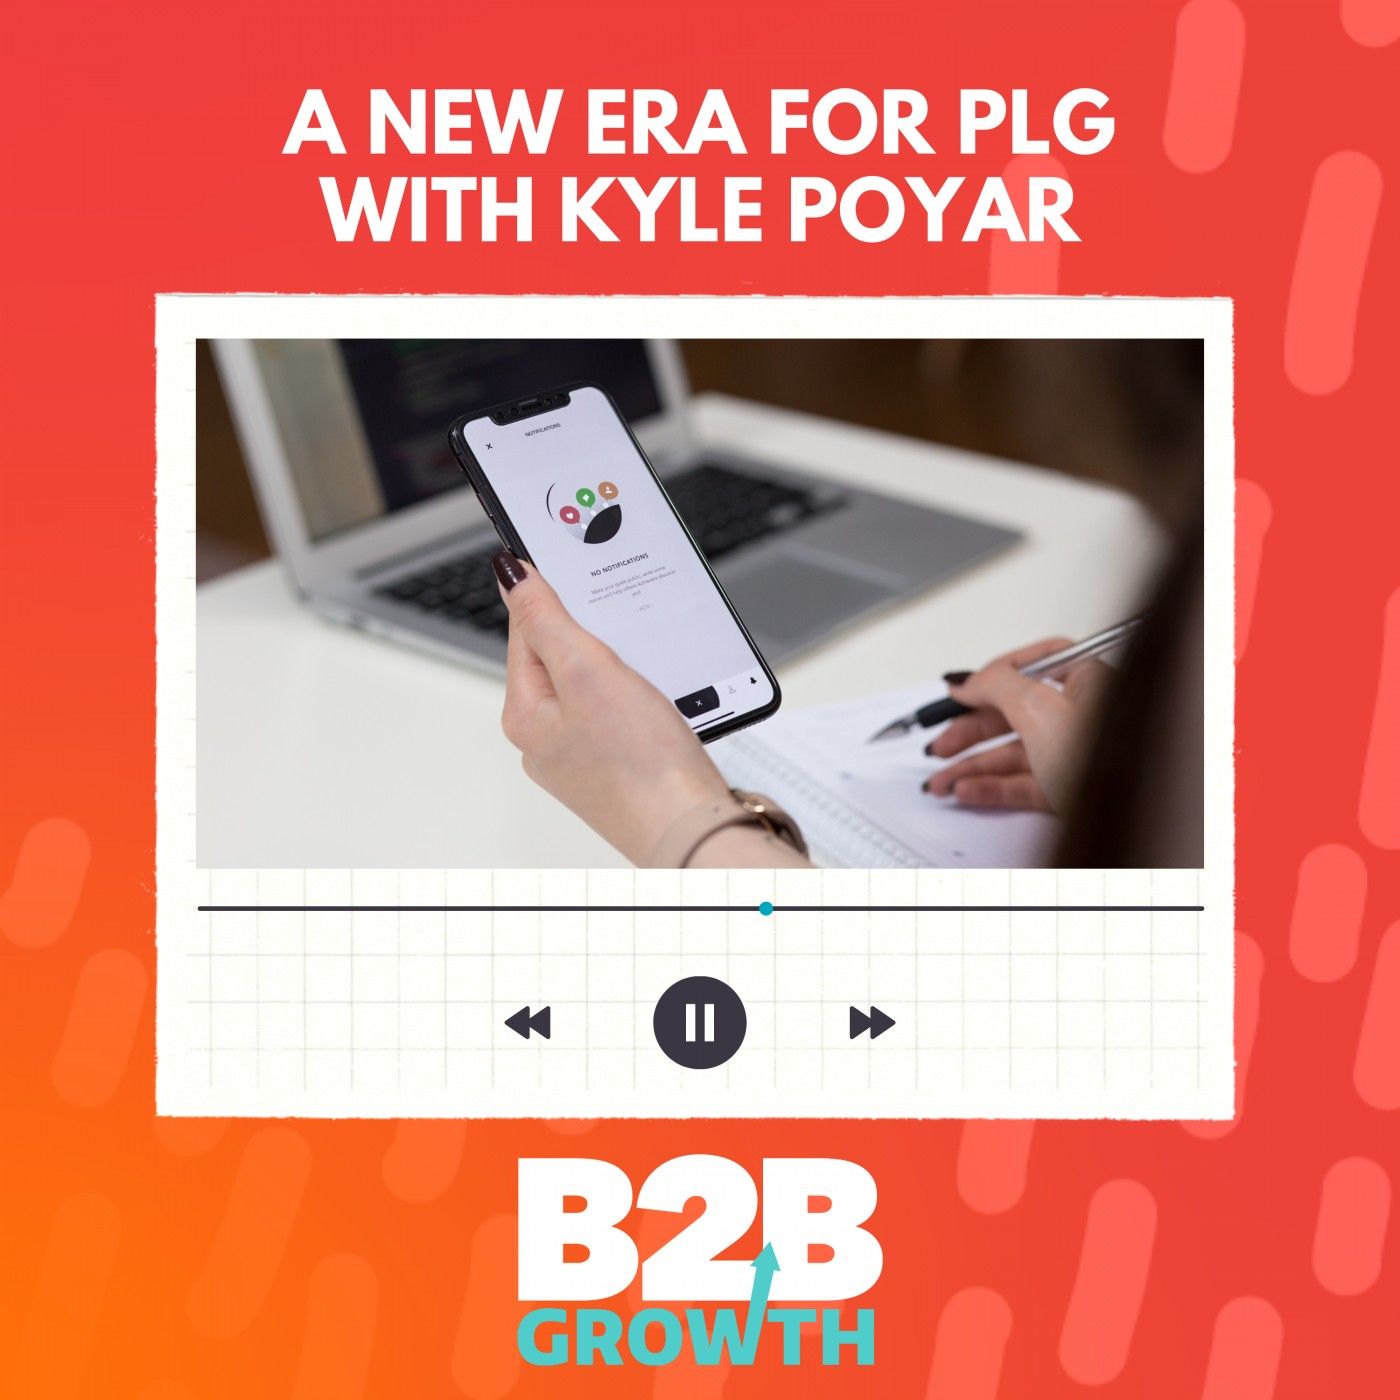 A New Era for PLG, with Kyle Poyar